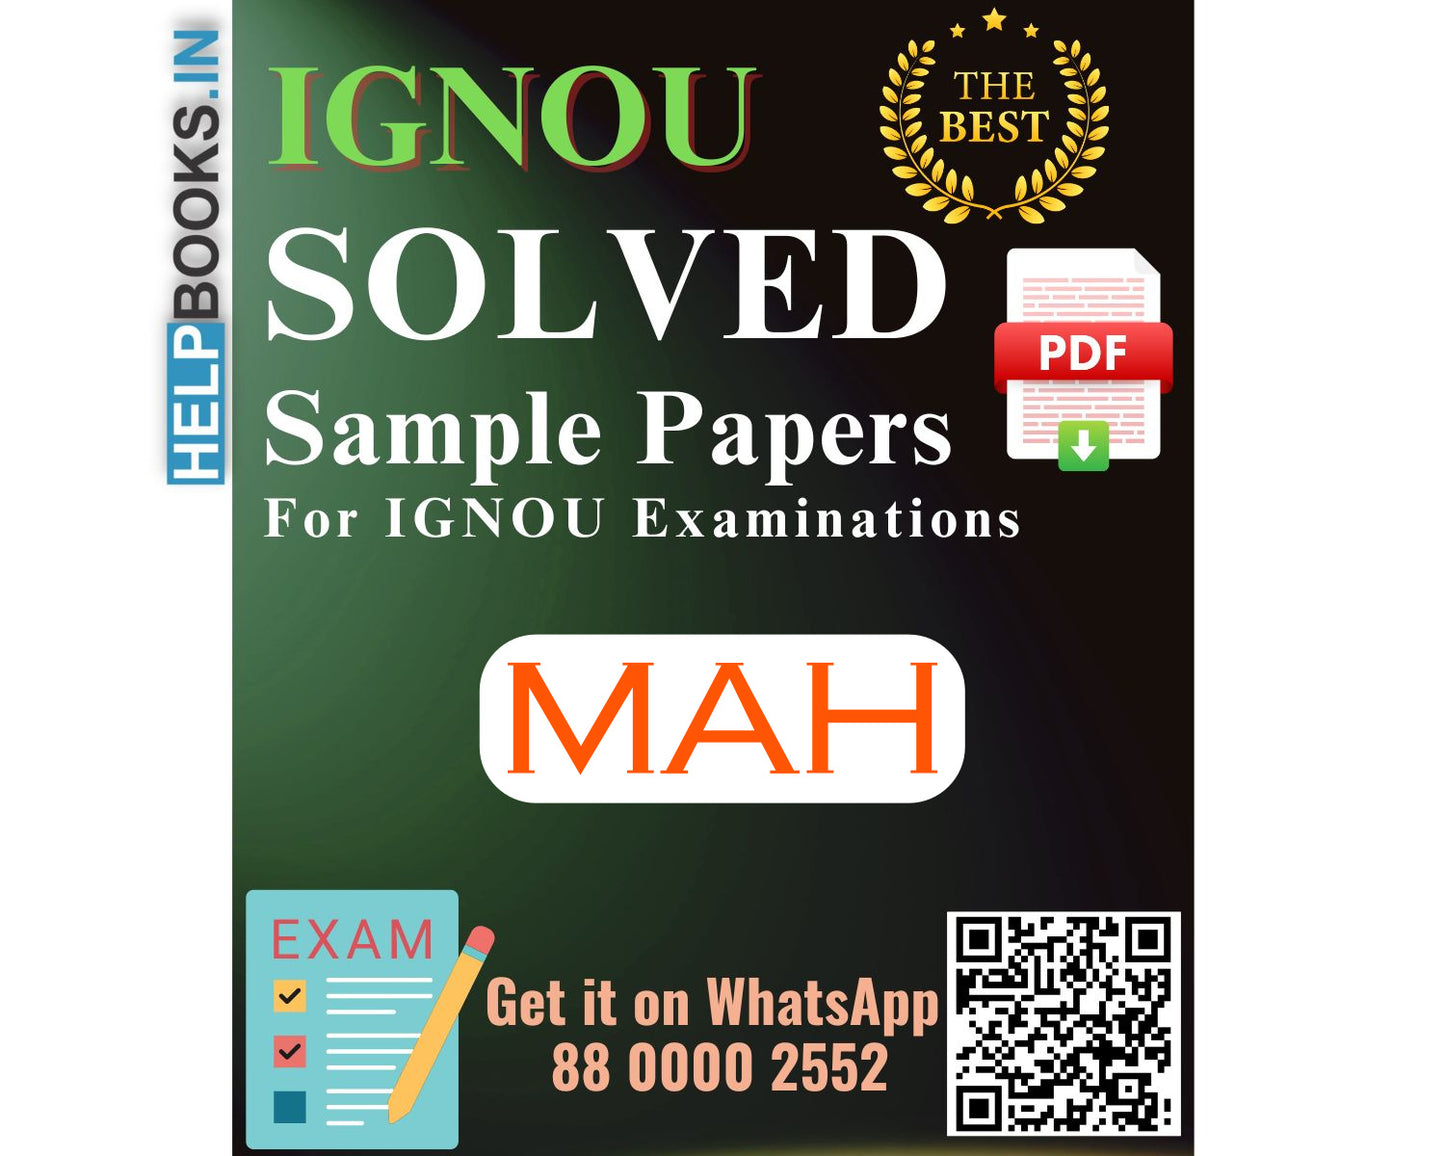 IGNOU Master of Arts (History) (MAH) | Solved Sample Papers for Exams